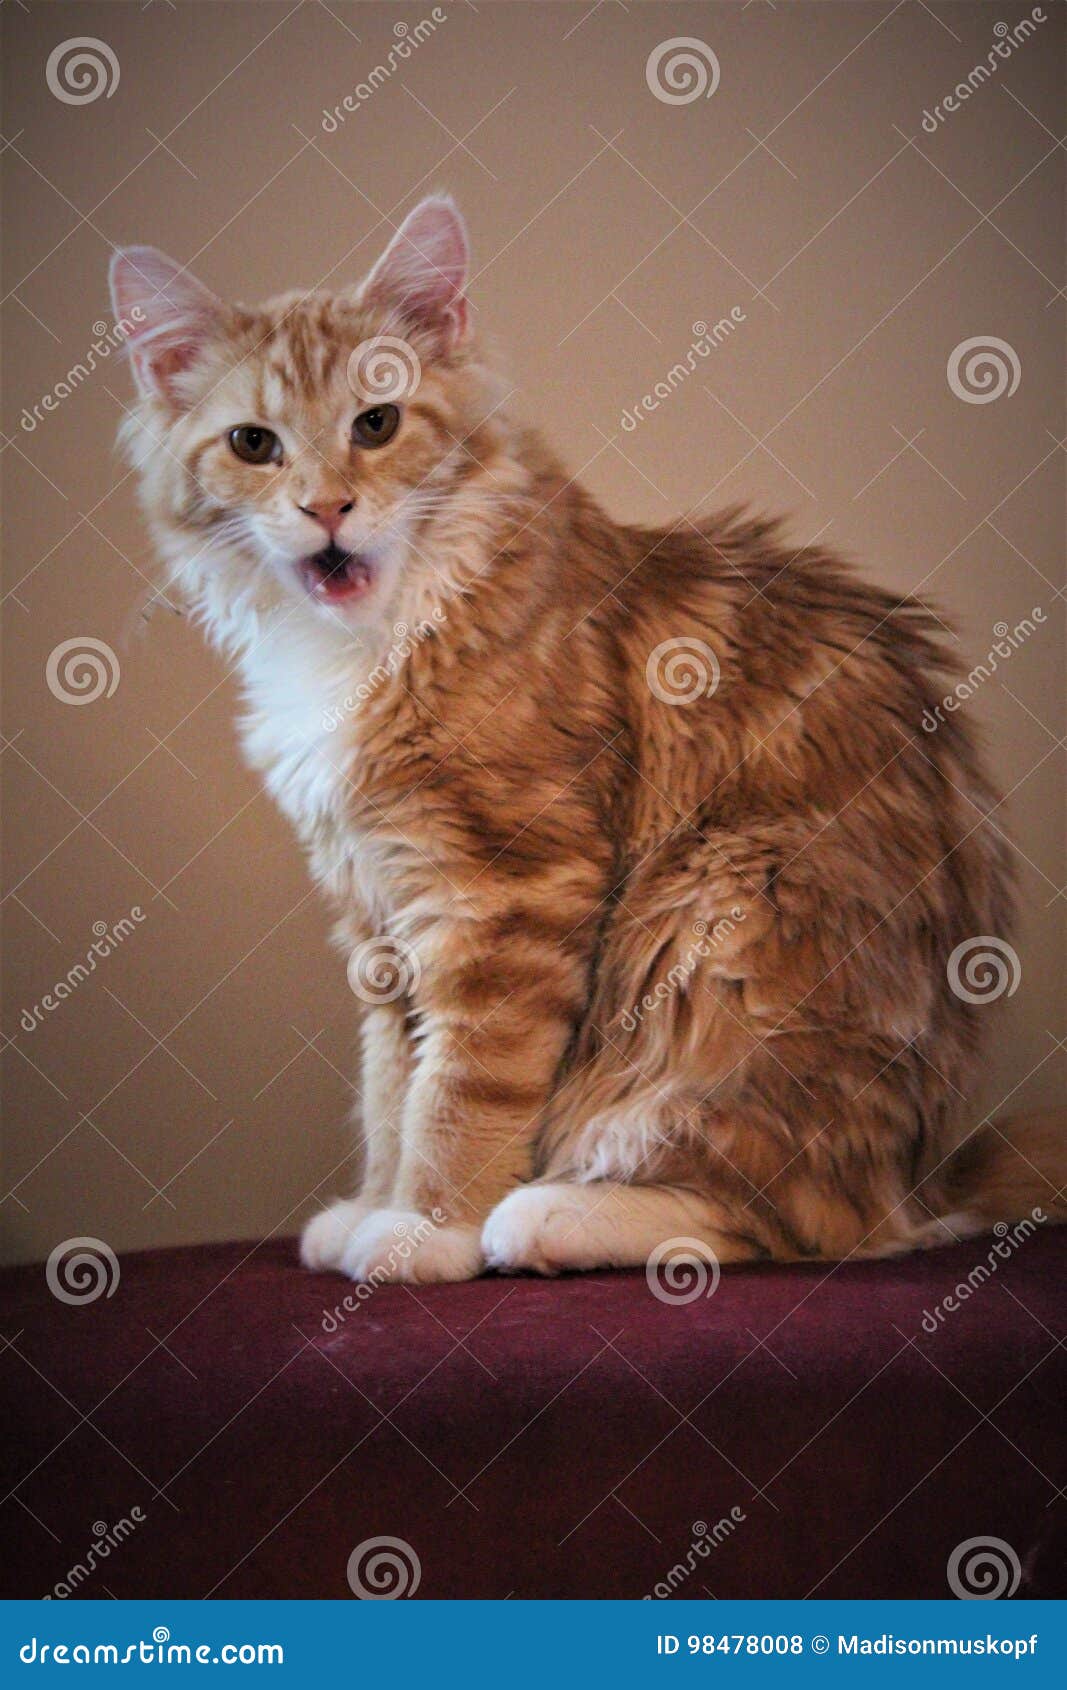 My Baby Maine Coon stock photo. Image of redhead, kitten - 98478008